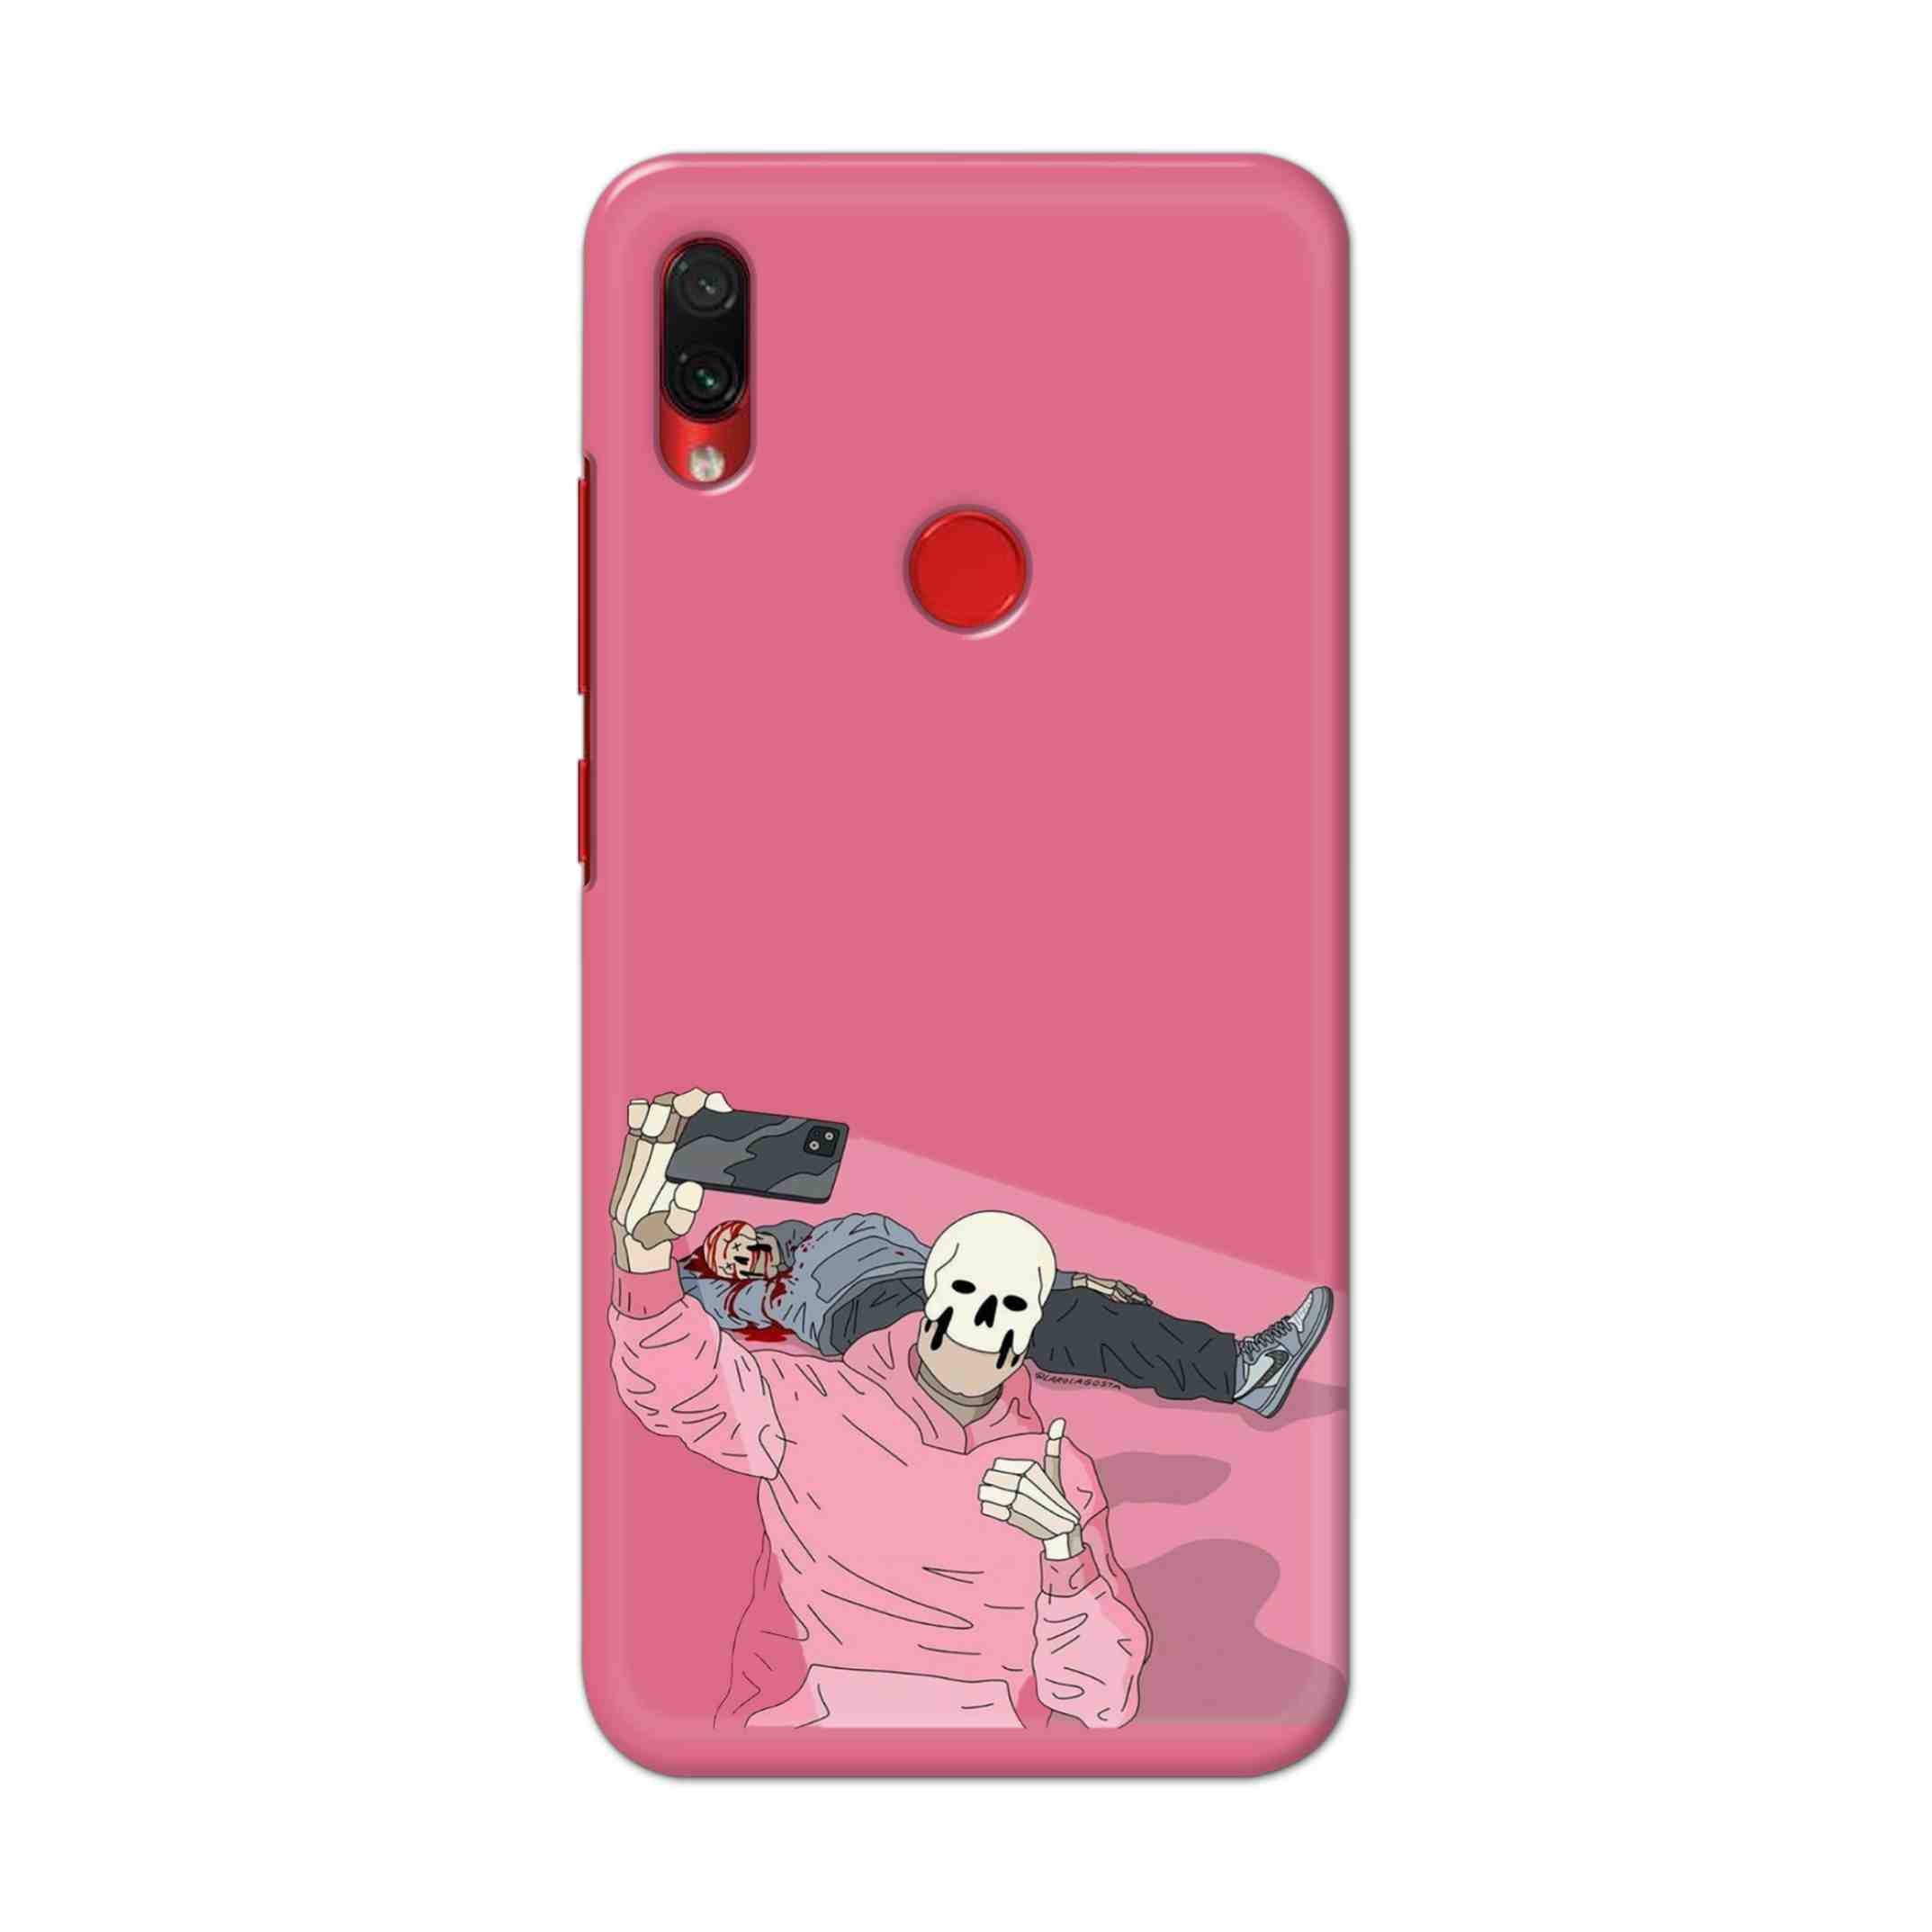 Buy Selfie Hard Back Mobile Phone Case Cover For Xiaomi Redmi Note 7S Online